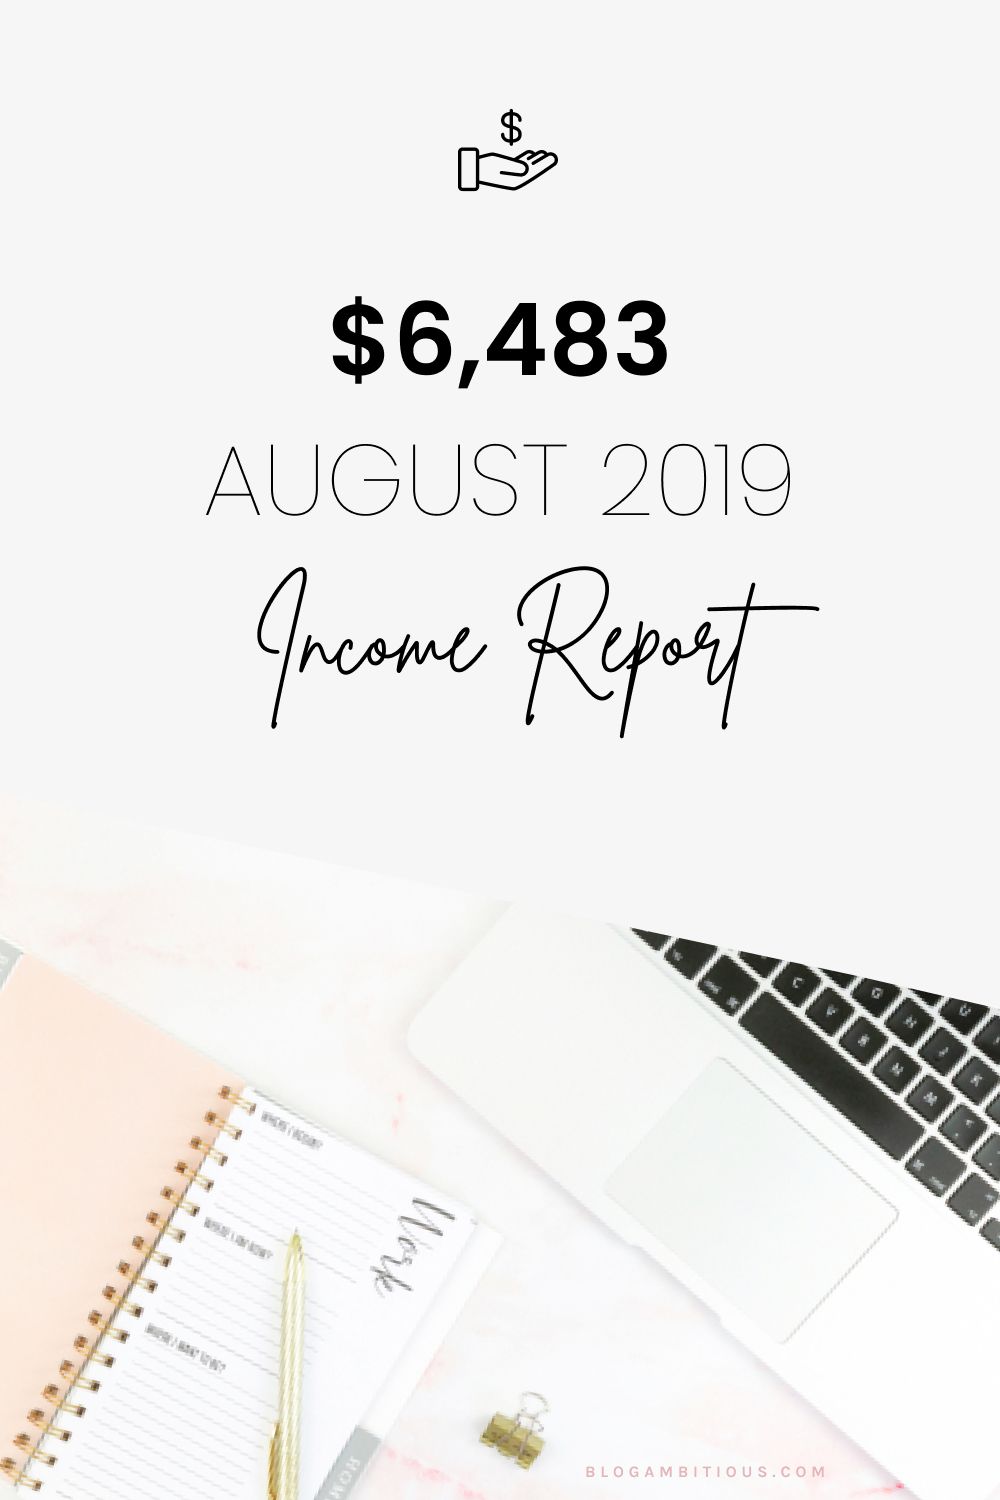 August 2019 Income Report